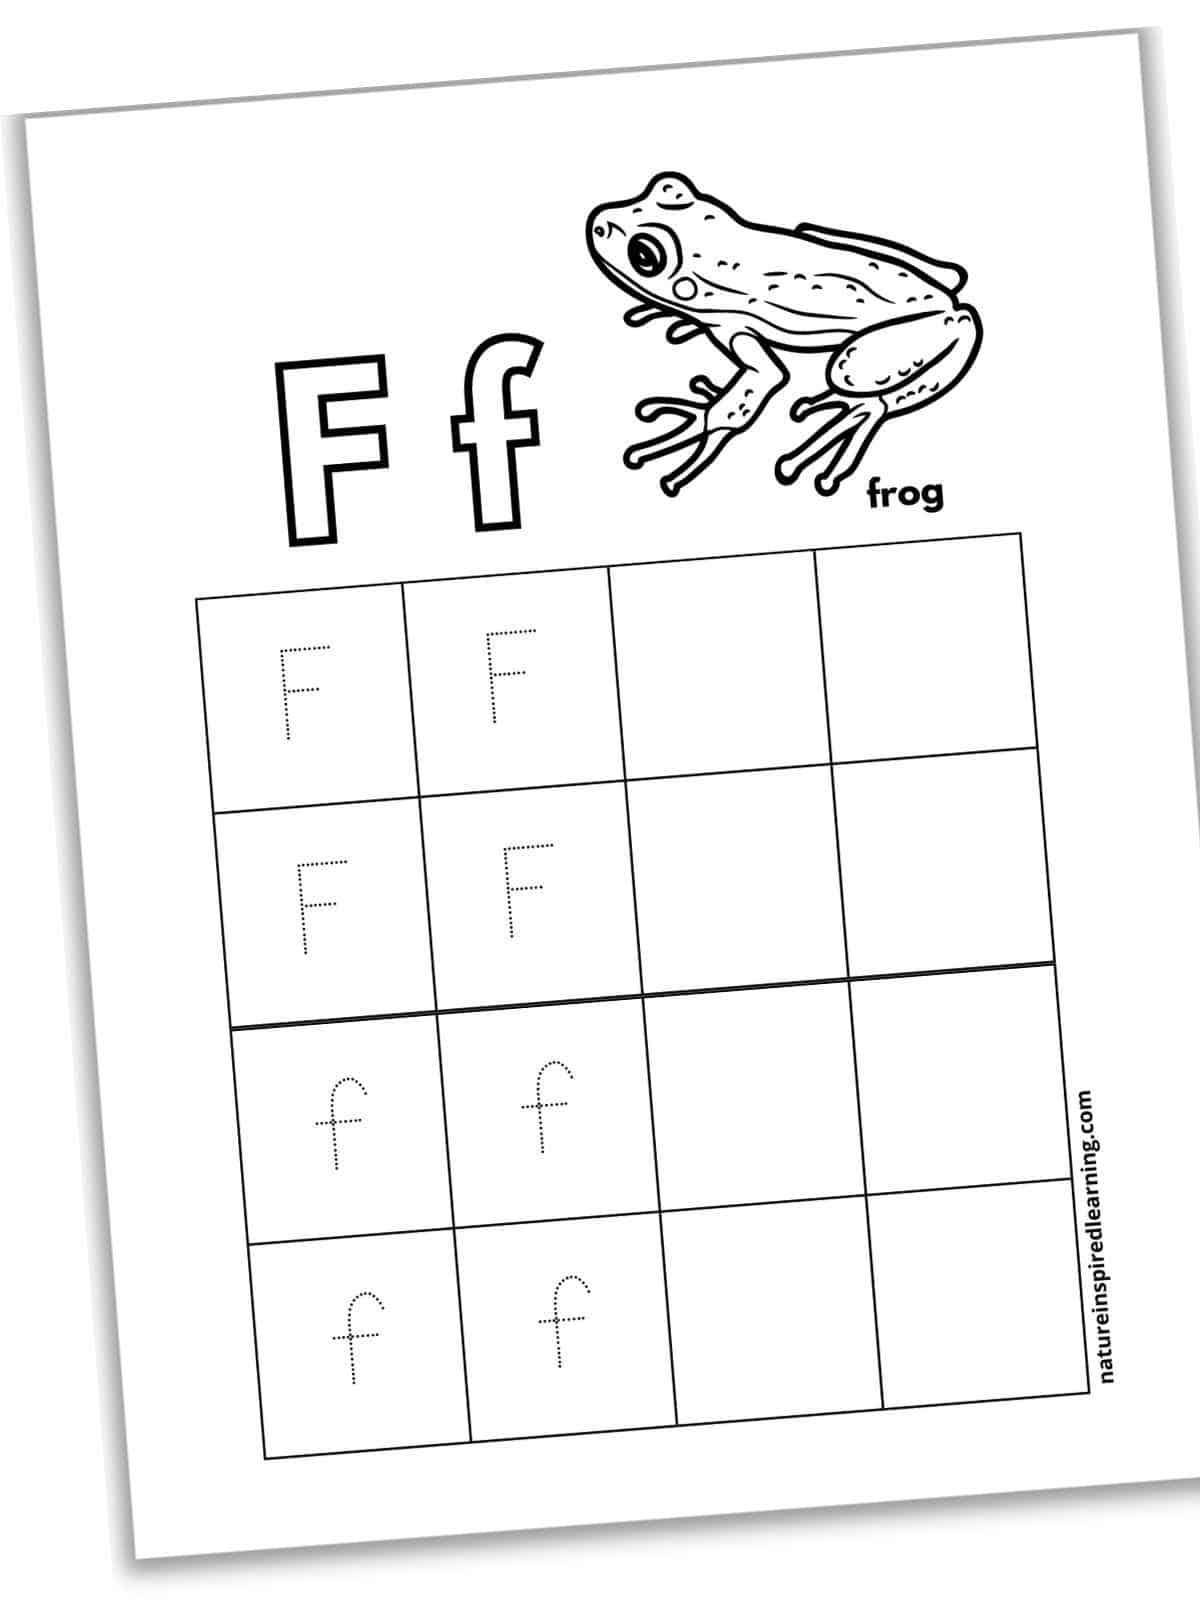 Printable with outlines of F f and a black and white frog across the top. Set of boxes, four with capital F, four with lowercase f, and eight blank boxes to the right of the letters. Worksheet slanted with a drop shadow.